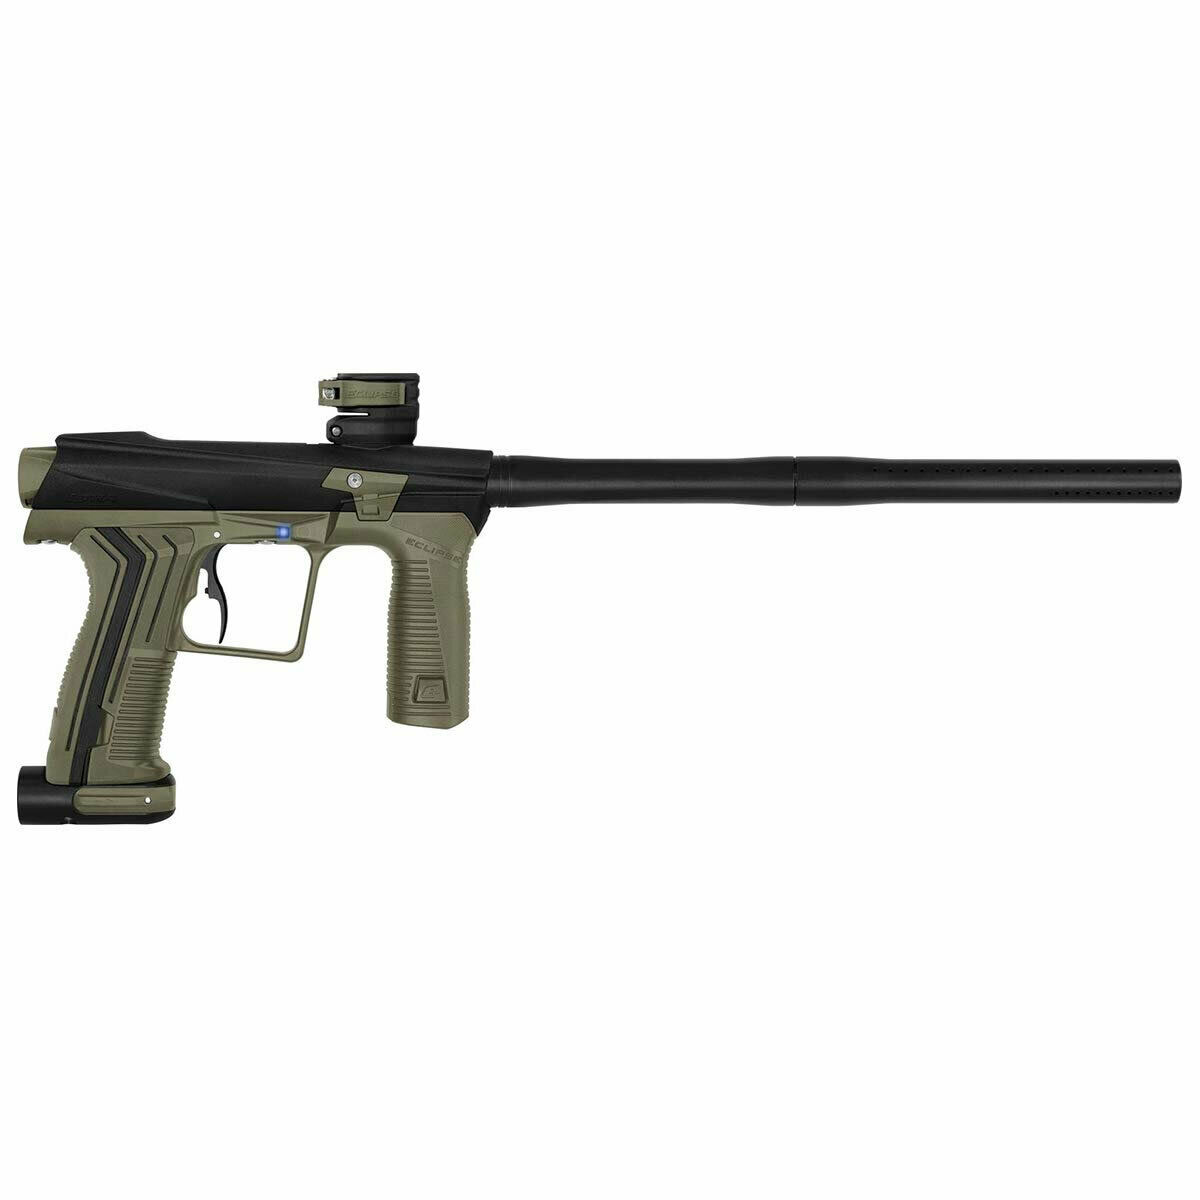 Planet Eclipse Etha 2 Pal Enabled - Black / Earth - Paintball